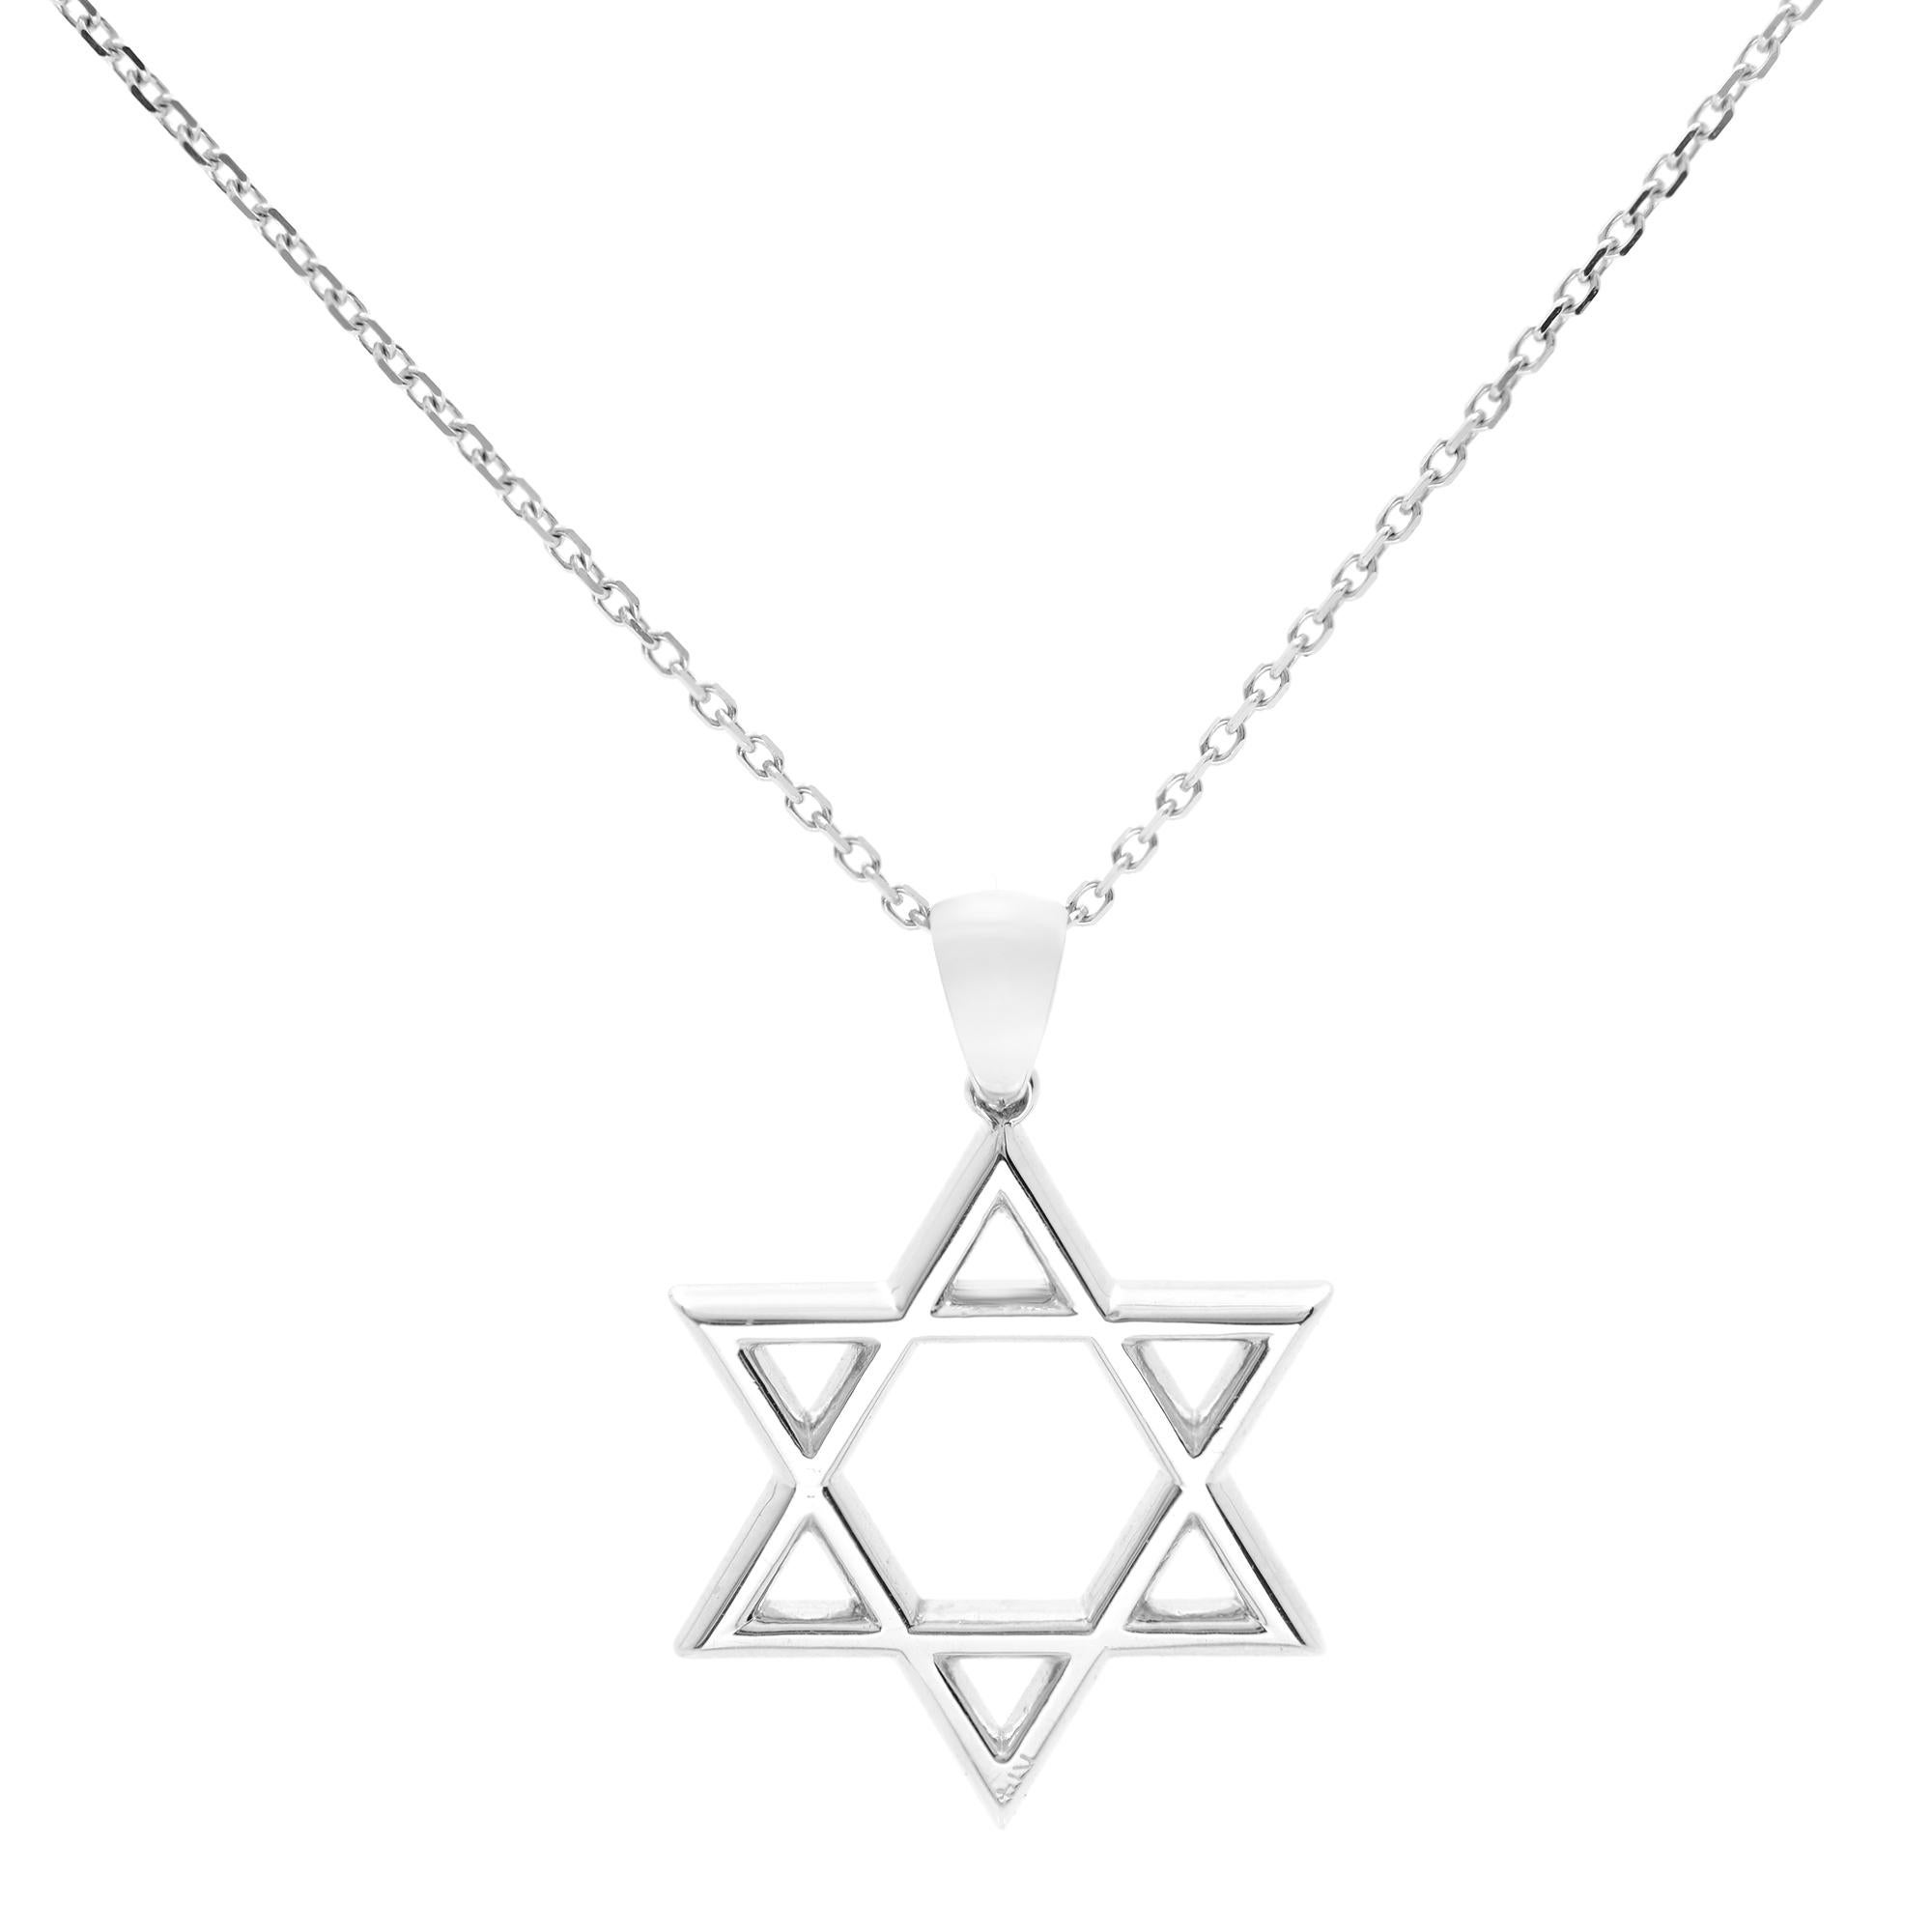 A delicate dazzling Star of David diamond pendant, crafted in 14K white gold. This shimmering open design is fully lined with sparkling diamonds boasting a color rank of G and clarity of SI-VS. Carat weight: 0.51. Pendant size: 26x18mm. Chain